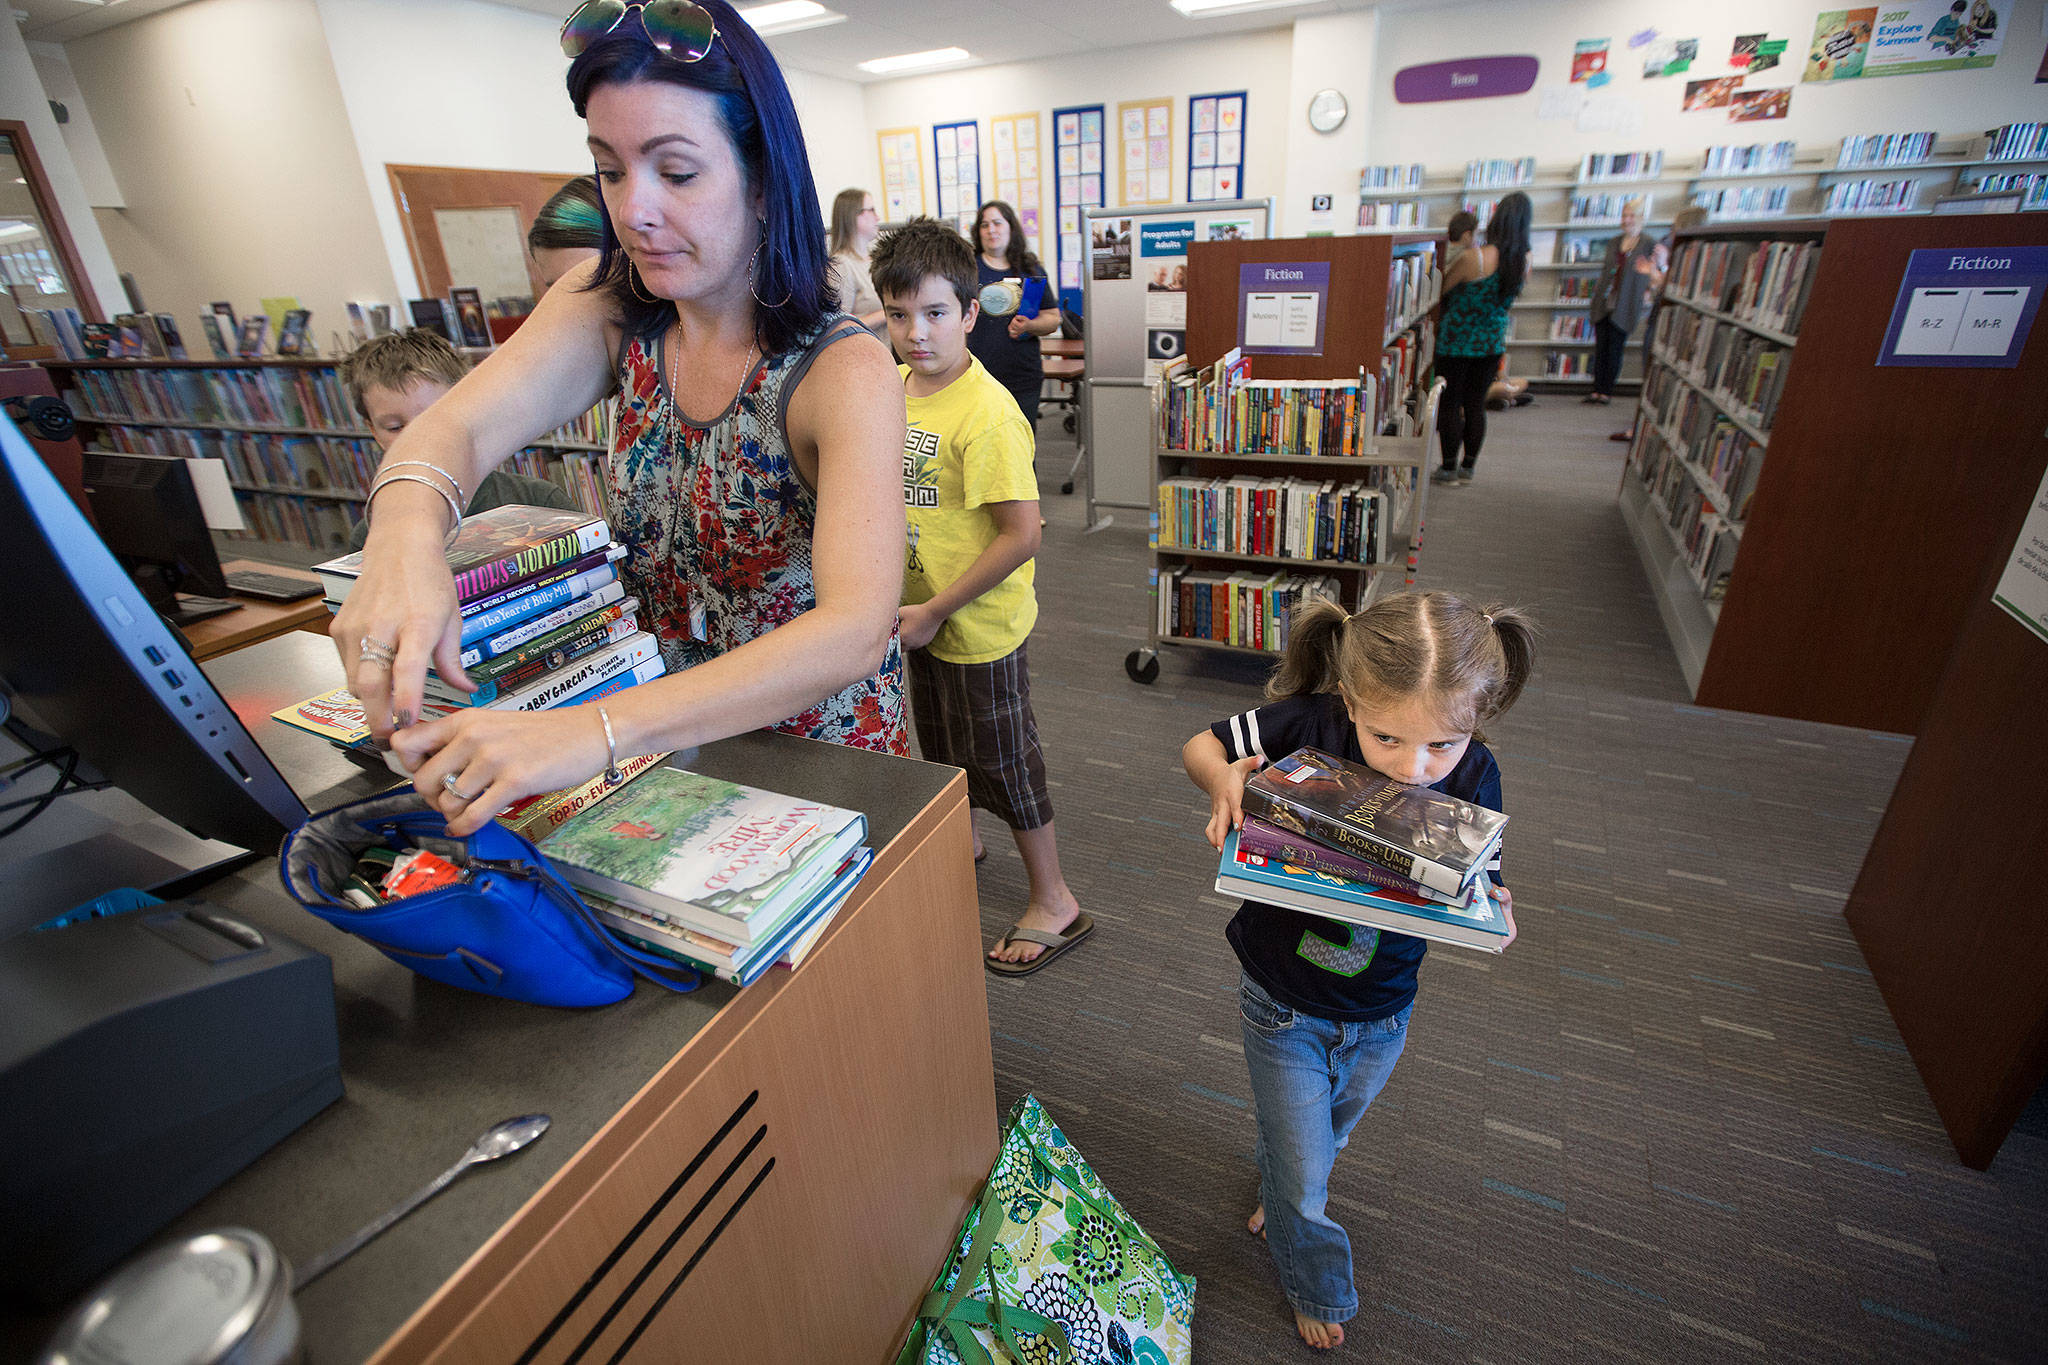 As her mother, Ande, looks for her library card, Magdalena Gaiten, 5, carries a heavy load of books to the checkout counter at Mariner Library on Monday in Everett. The family of four kids checked out 27 books from the library, which they visit weekly. (Andy Bronson / The Herald)